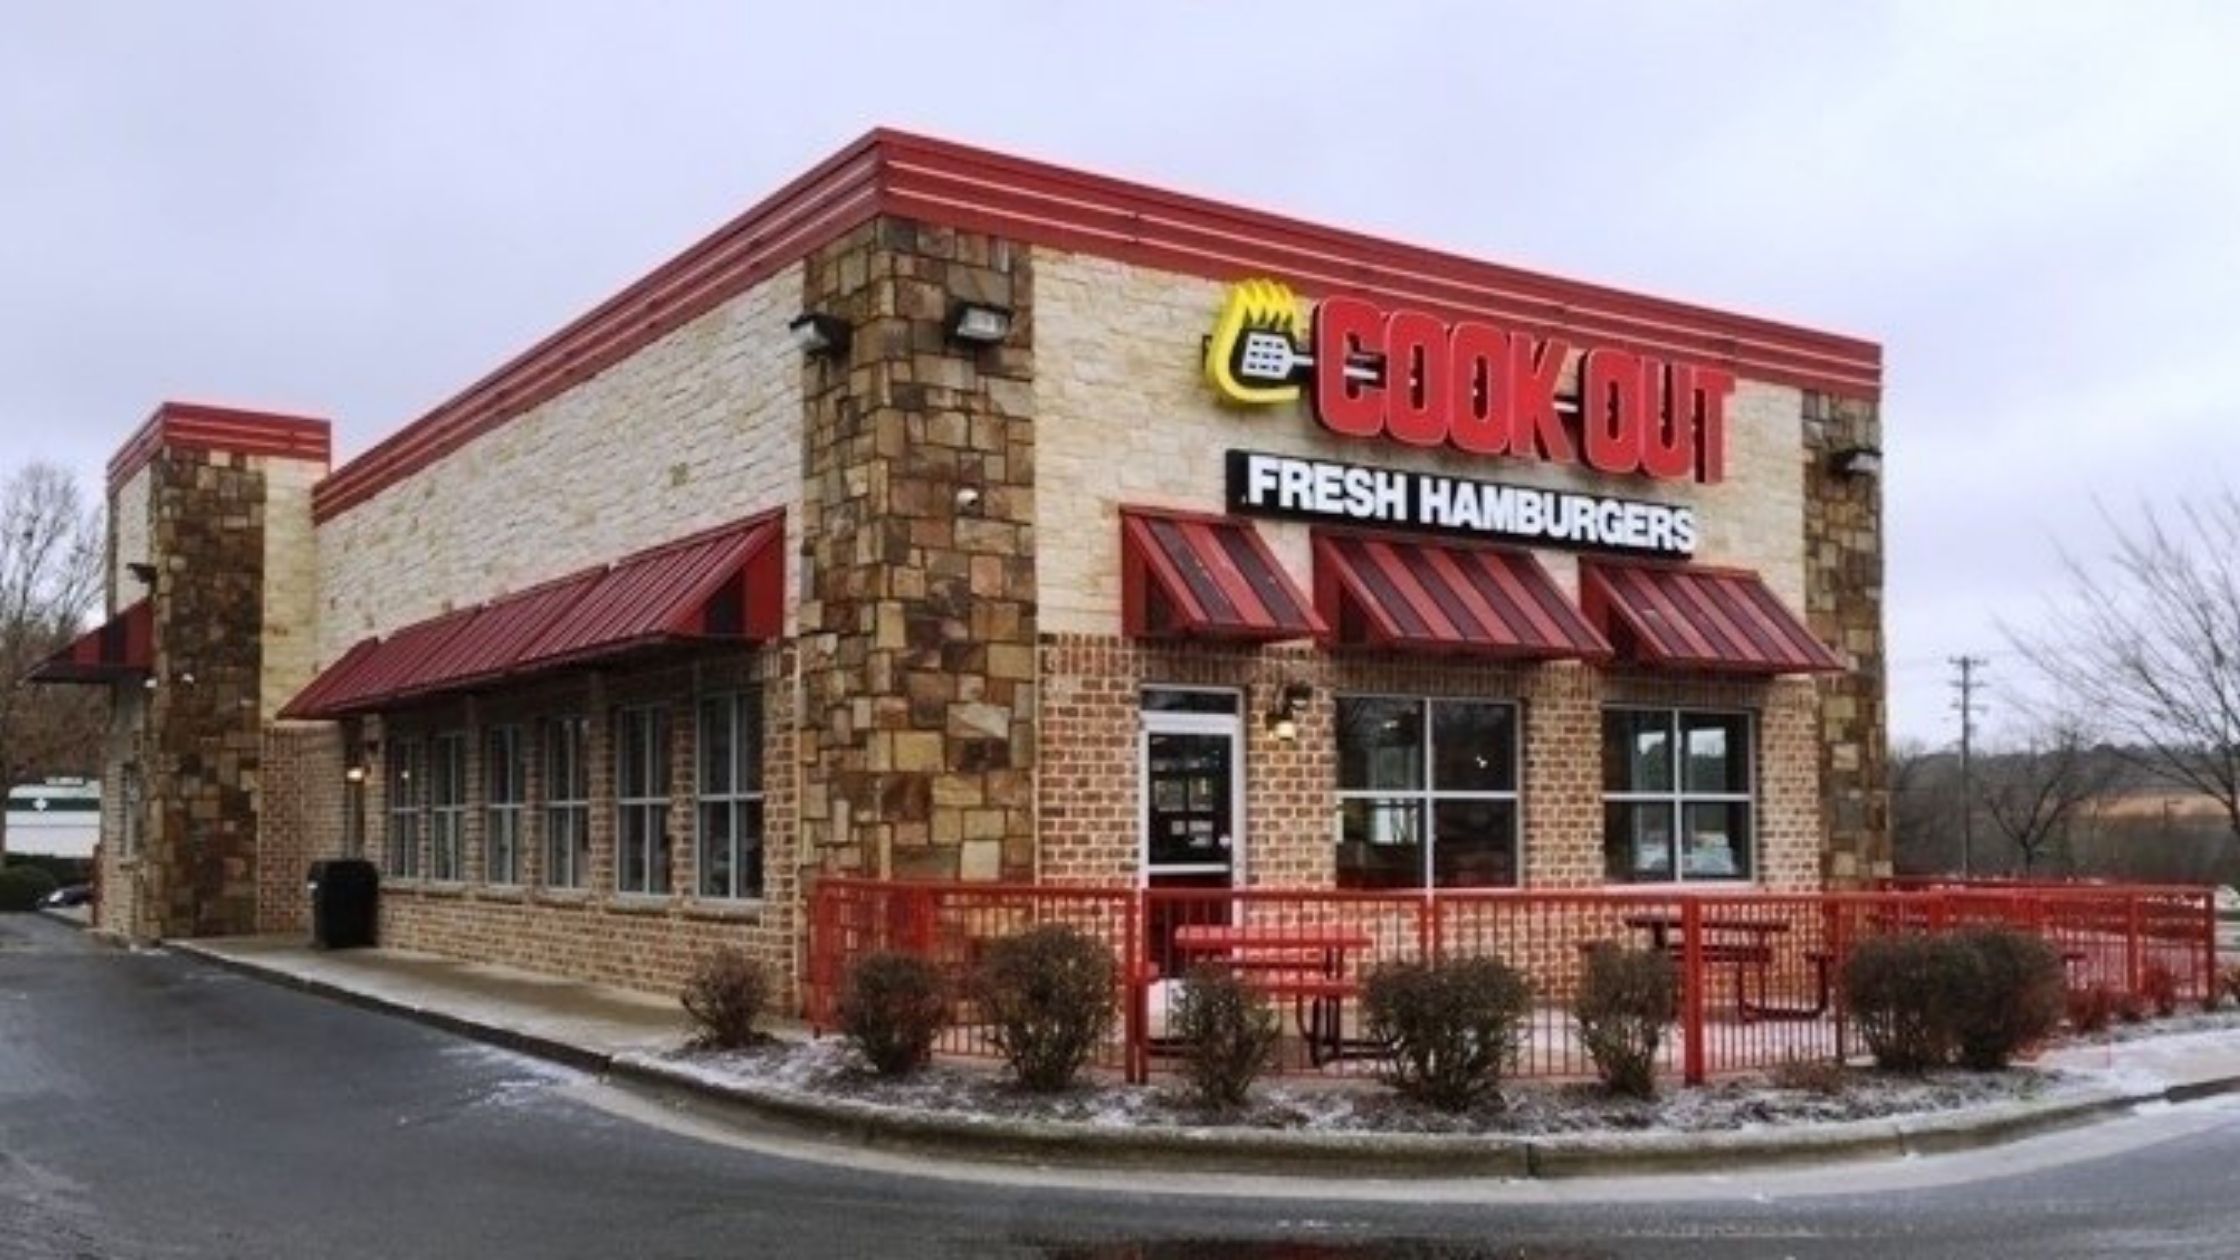 Cook Out Menu & Prices 2021